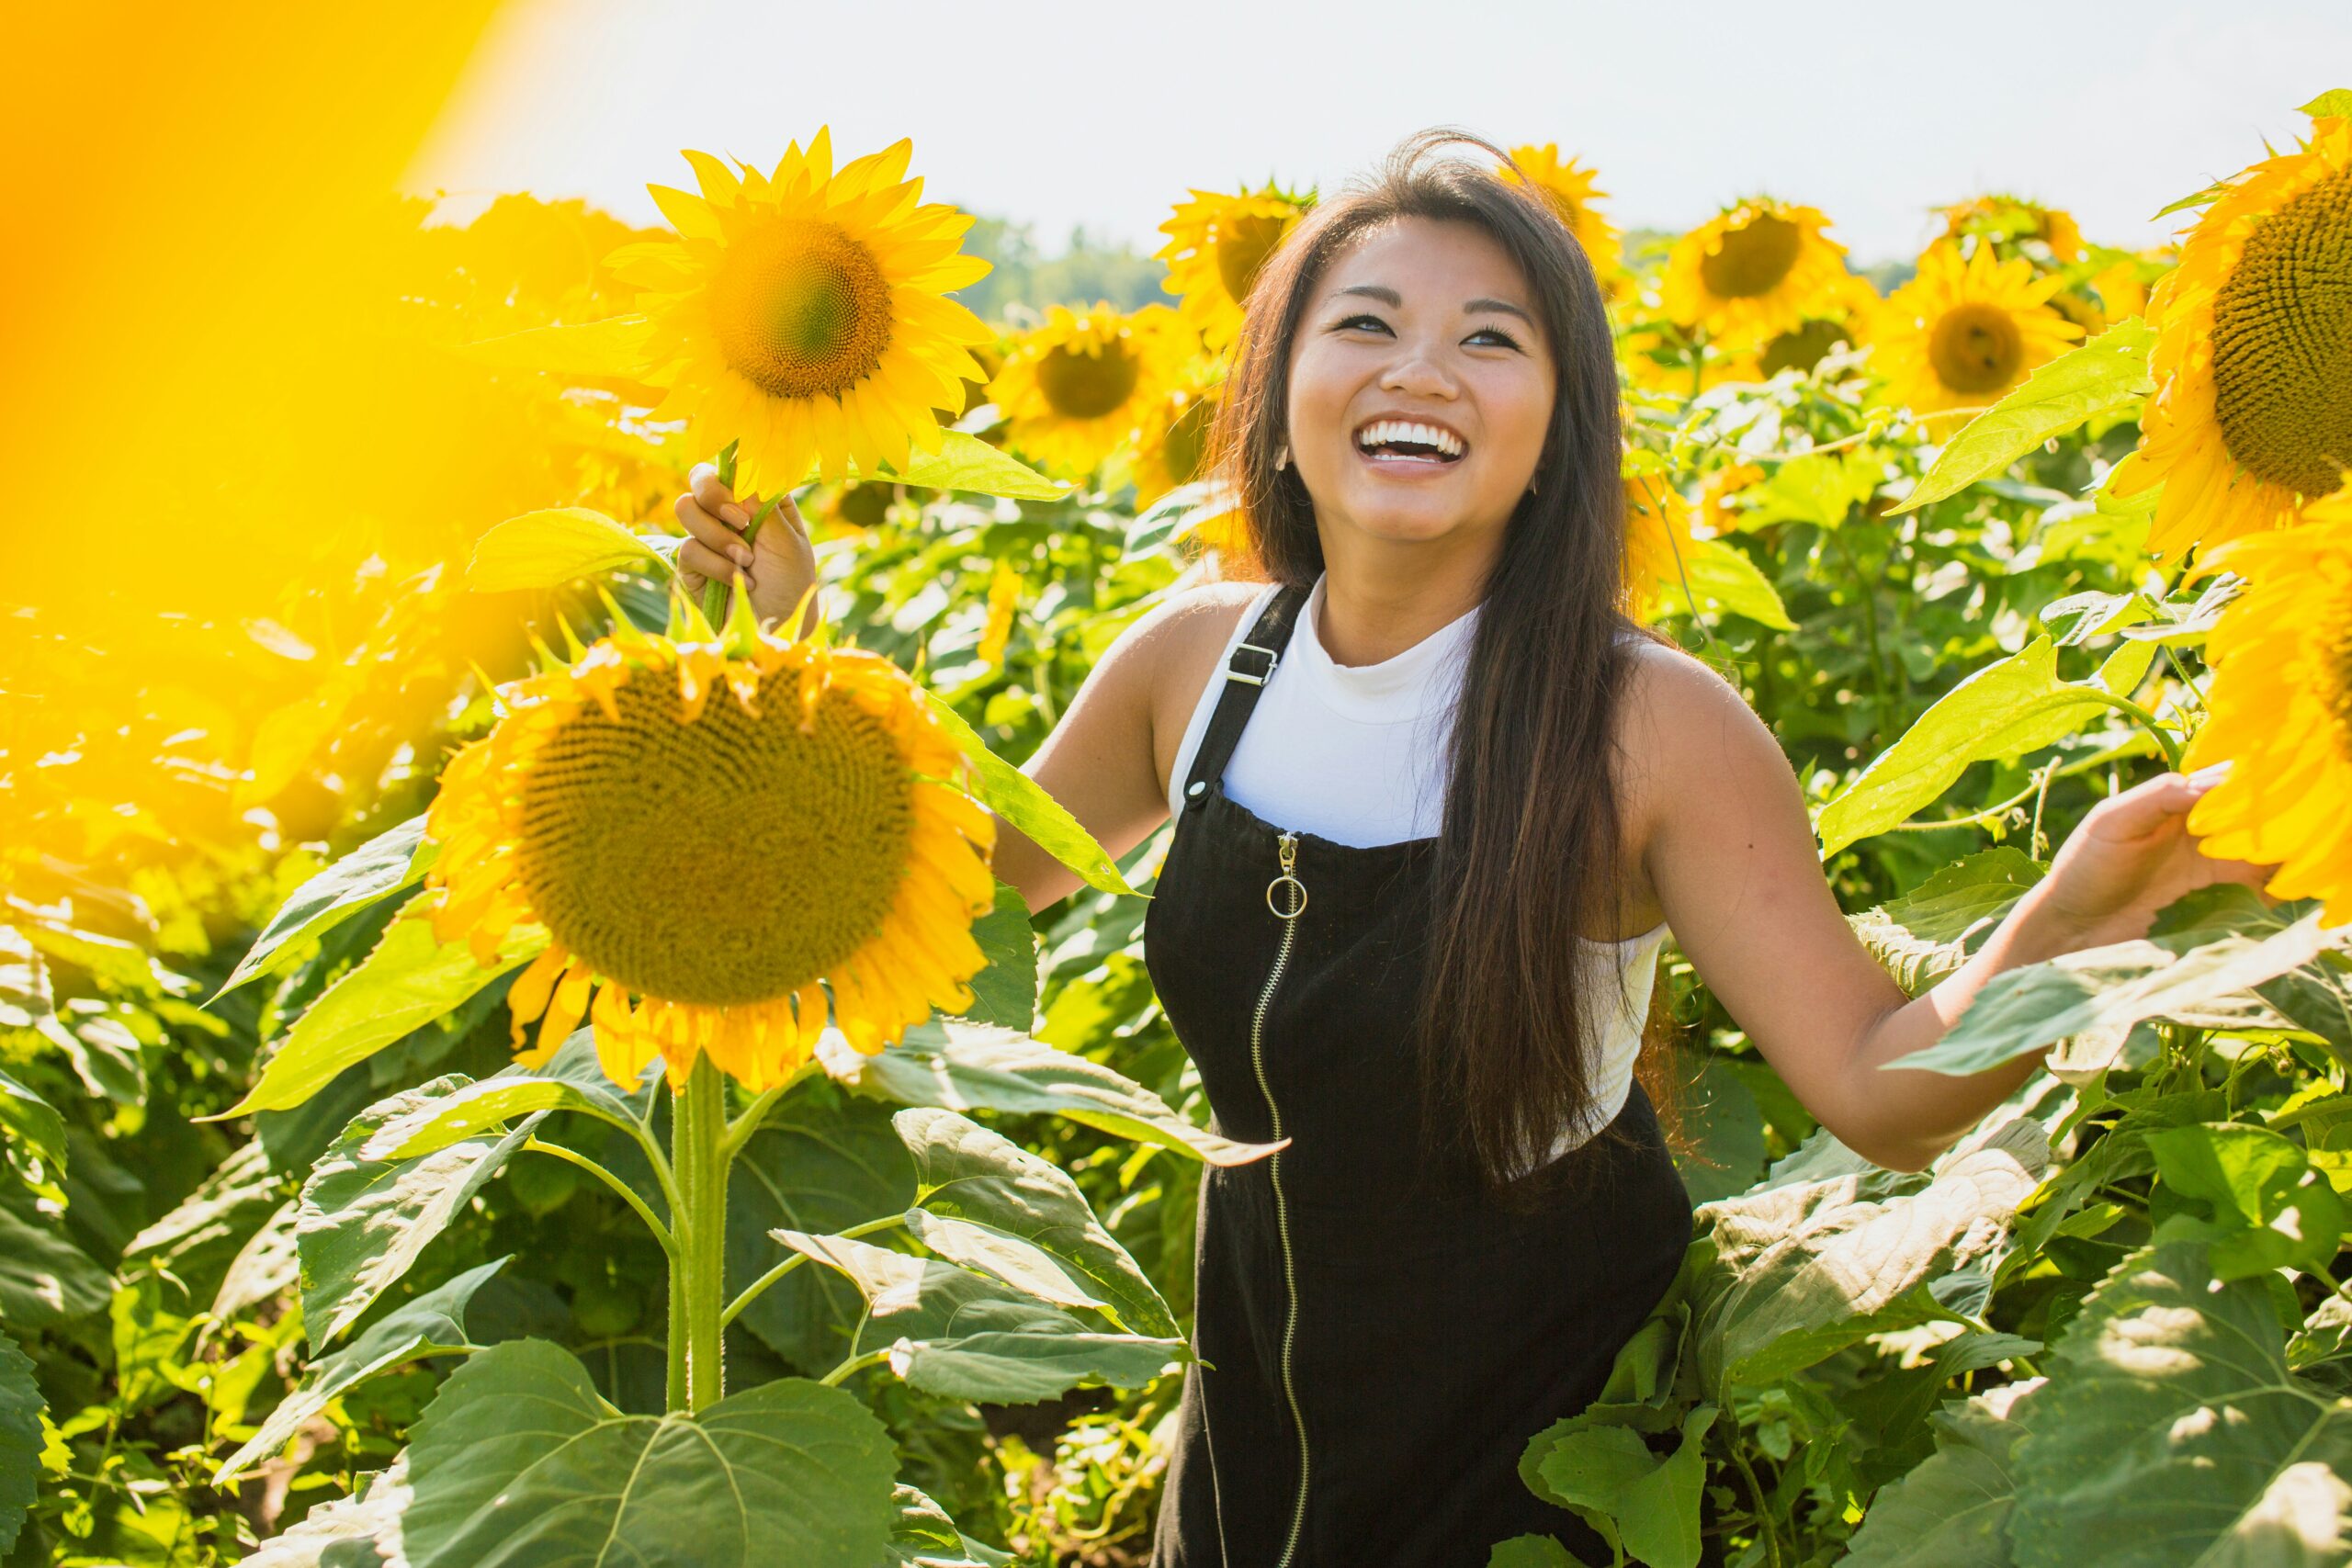 Smiling, confident woman standing in a sunflower field. Therapy in Manhattan can help you feel more confident and boost your self-esteem.